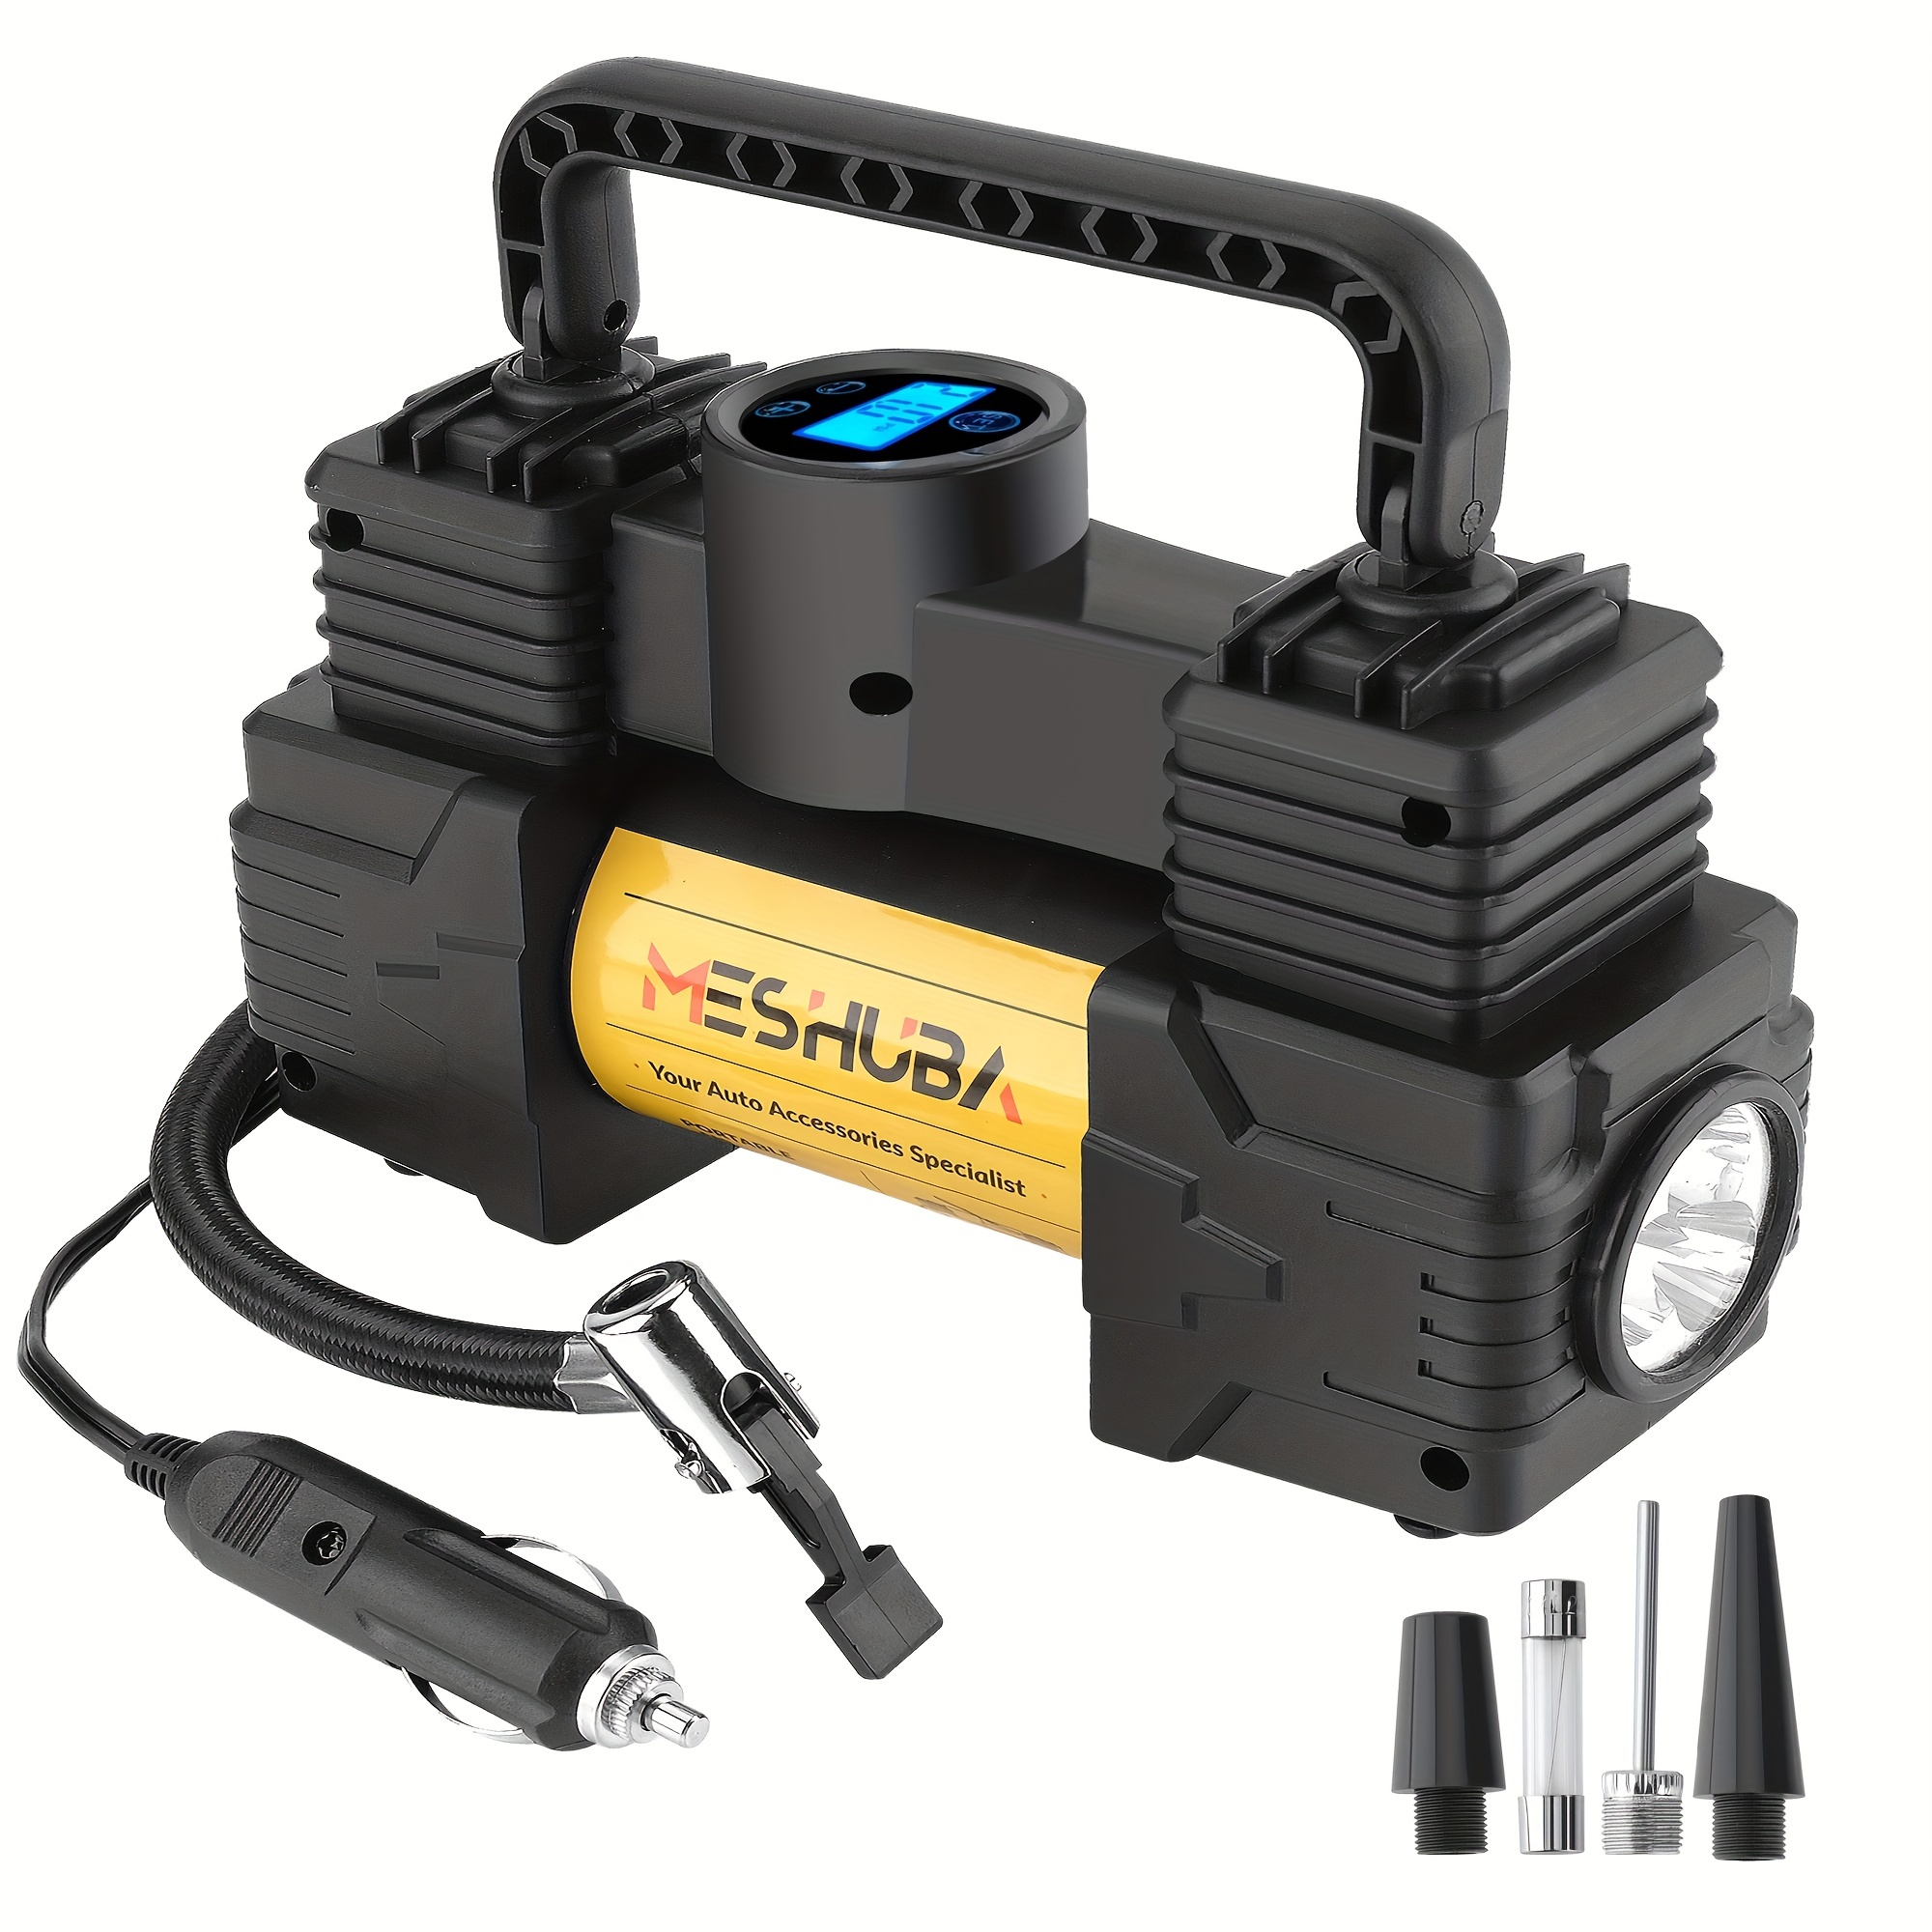 Tire Inflator Portable Air Compressor - Air Pump for Car Tires by